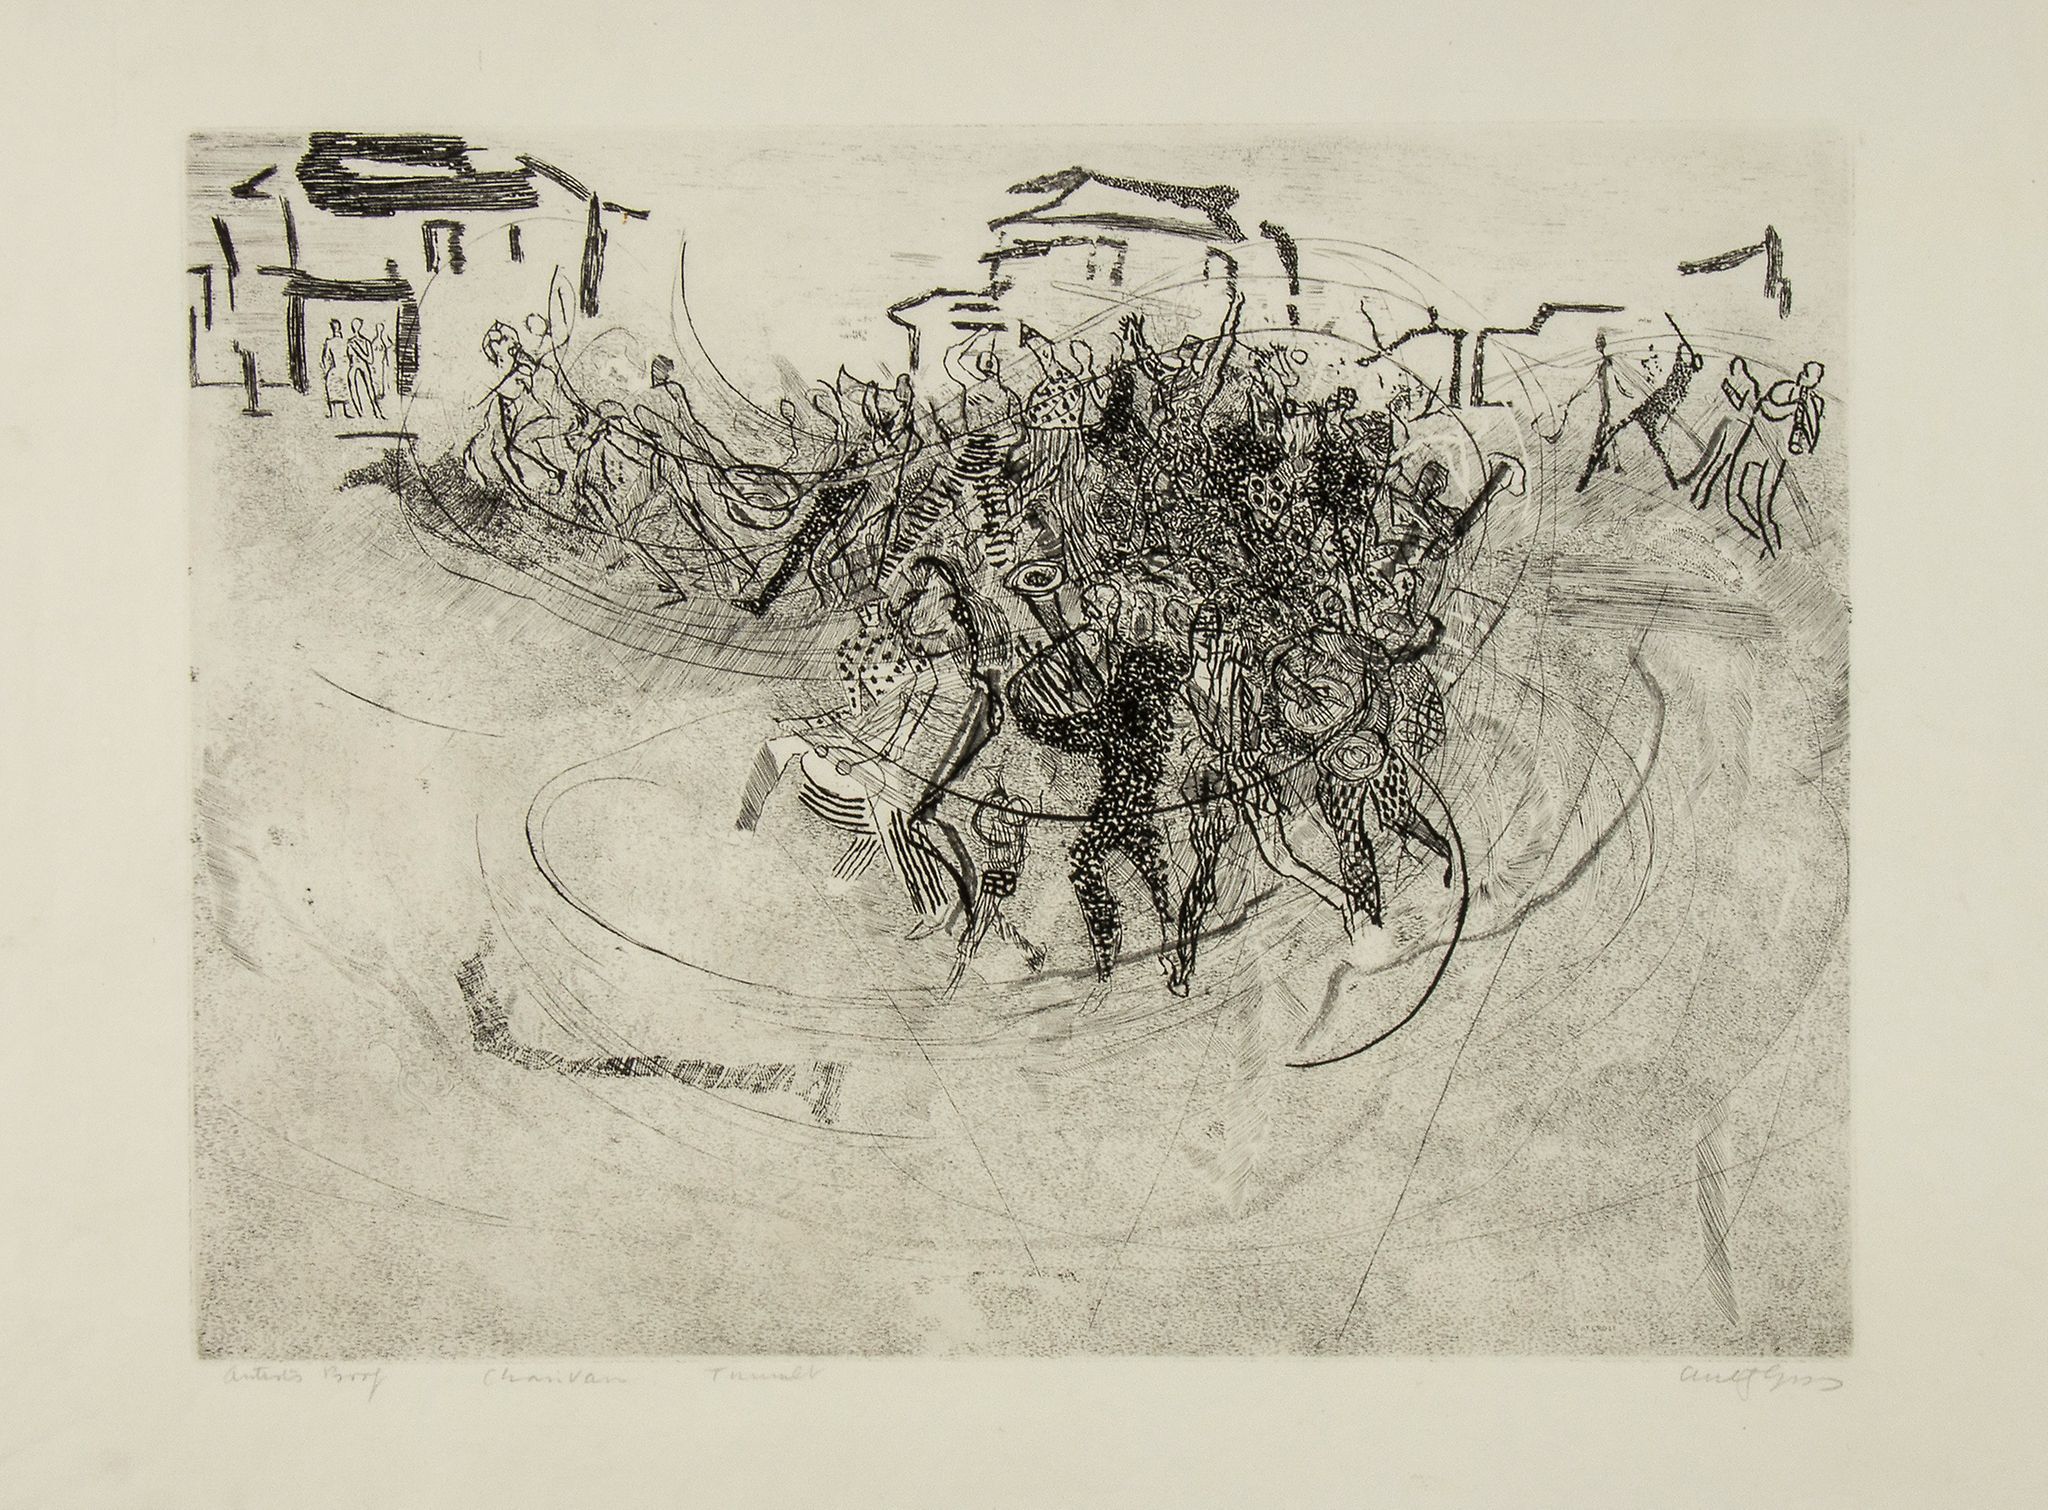 Anthony Gross (1905-1984) - Chiarava/Tumult etching, 1960, signed and titled in pencil, inscribed